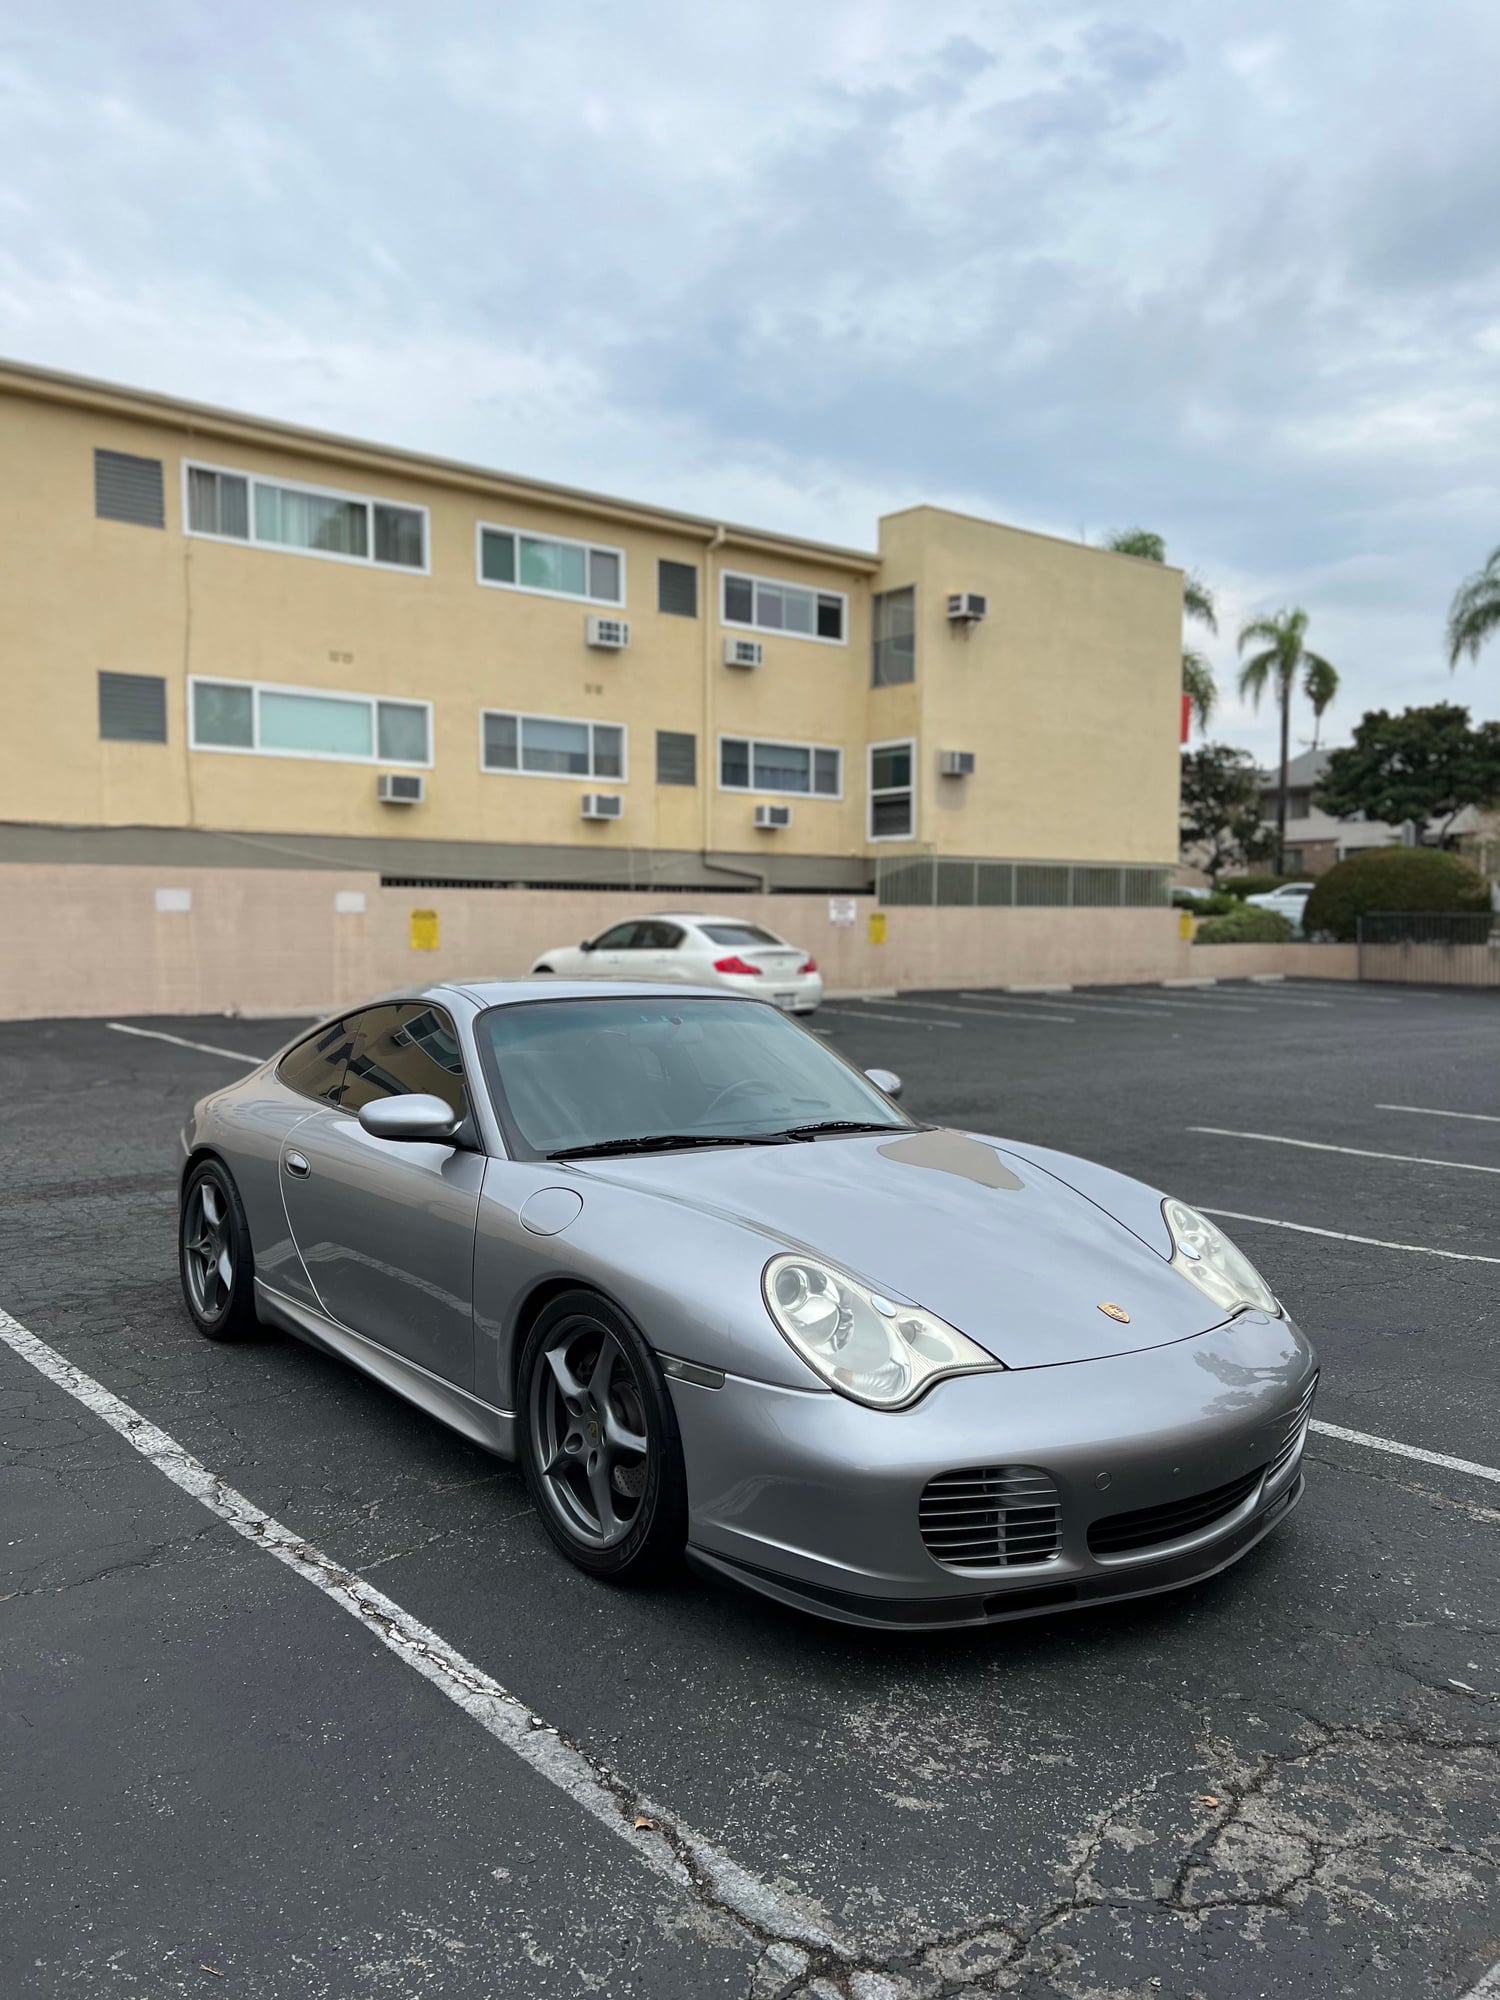 2004 Porsche 911 - 996 - 40th Anniversary X51 - Used - VIN WP0AA29904S621019 - 55,700 Miles - 6 cyl - 2WD - Manual - Coupe - Silver - West Hollywood, CA 90046, United States